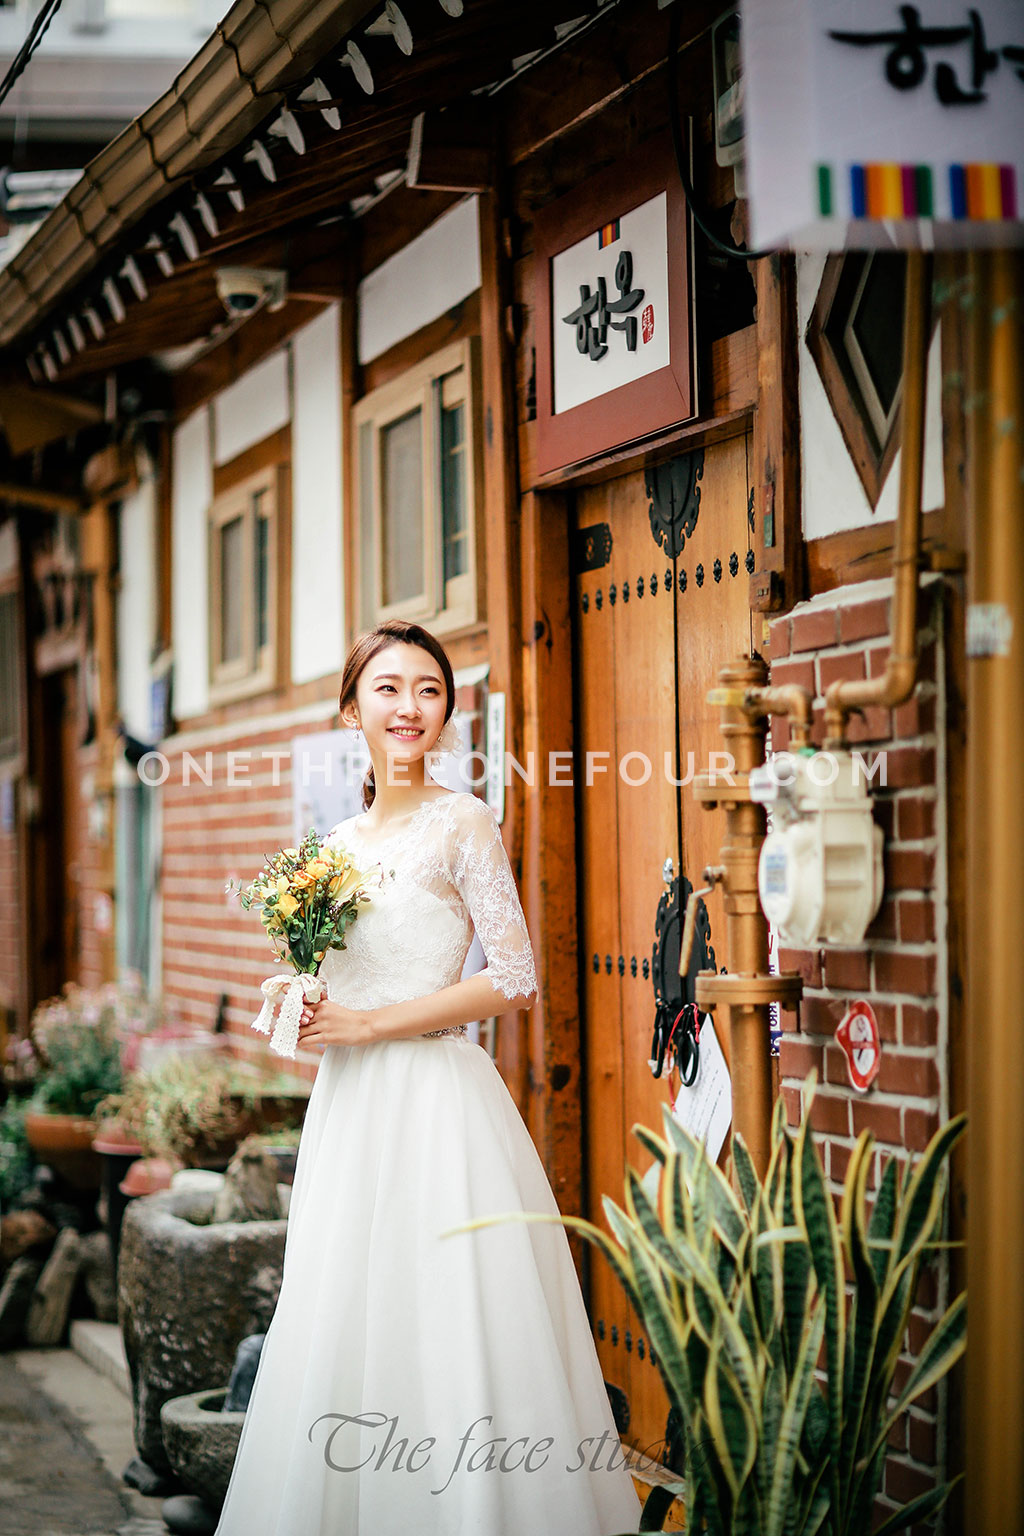 Korean Studio Pre-Wedding Photography: Outdoor by The Face Studio on OneThreeOneFour 9